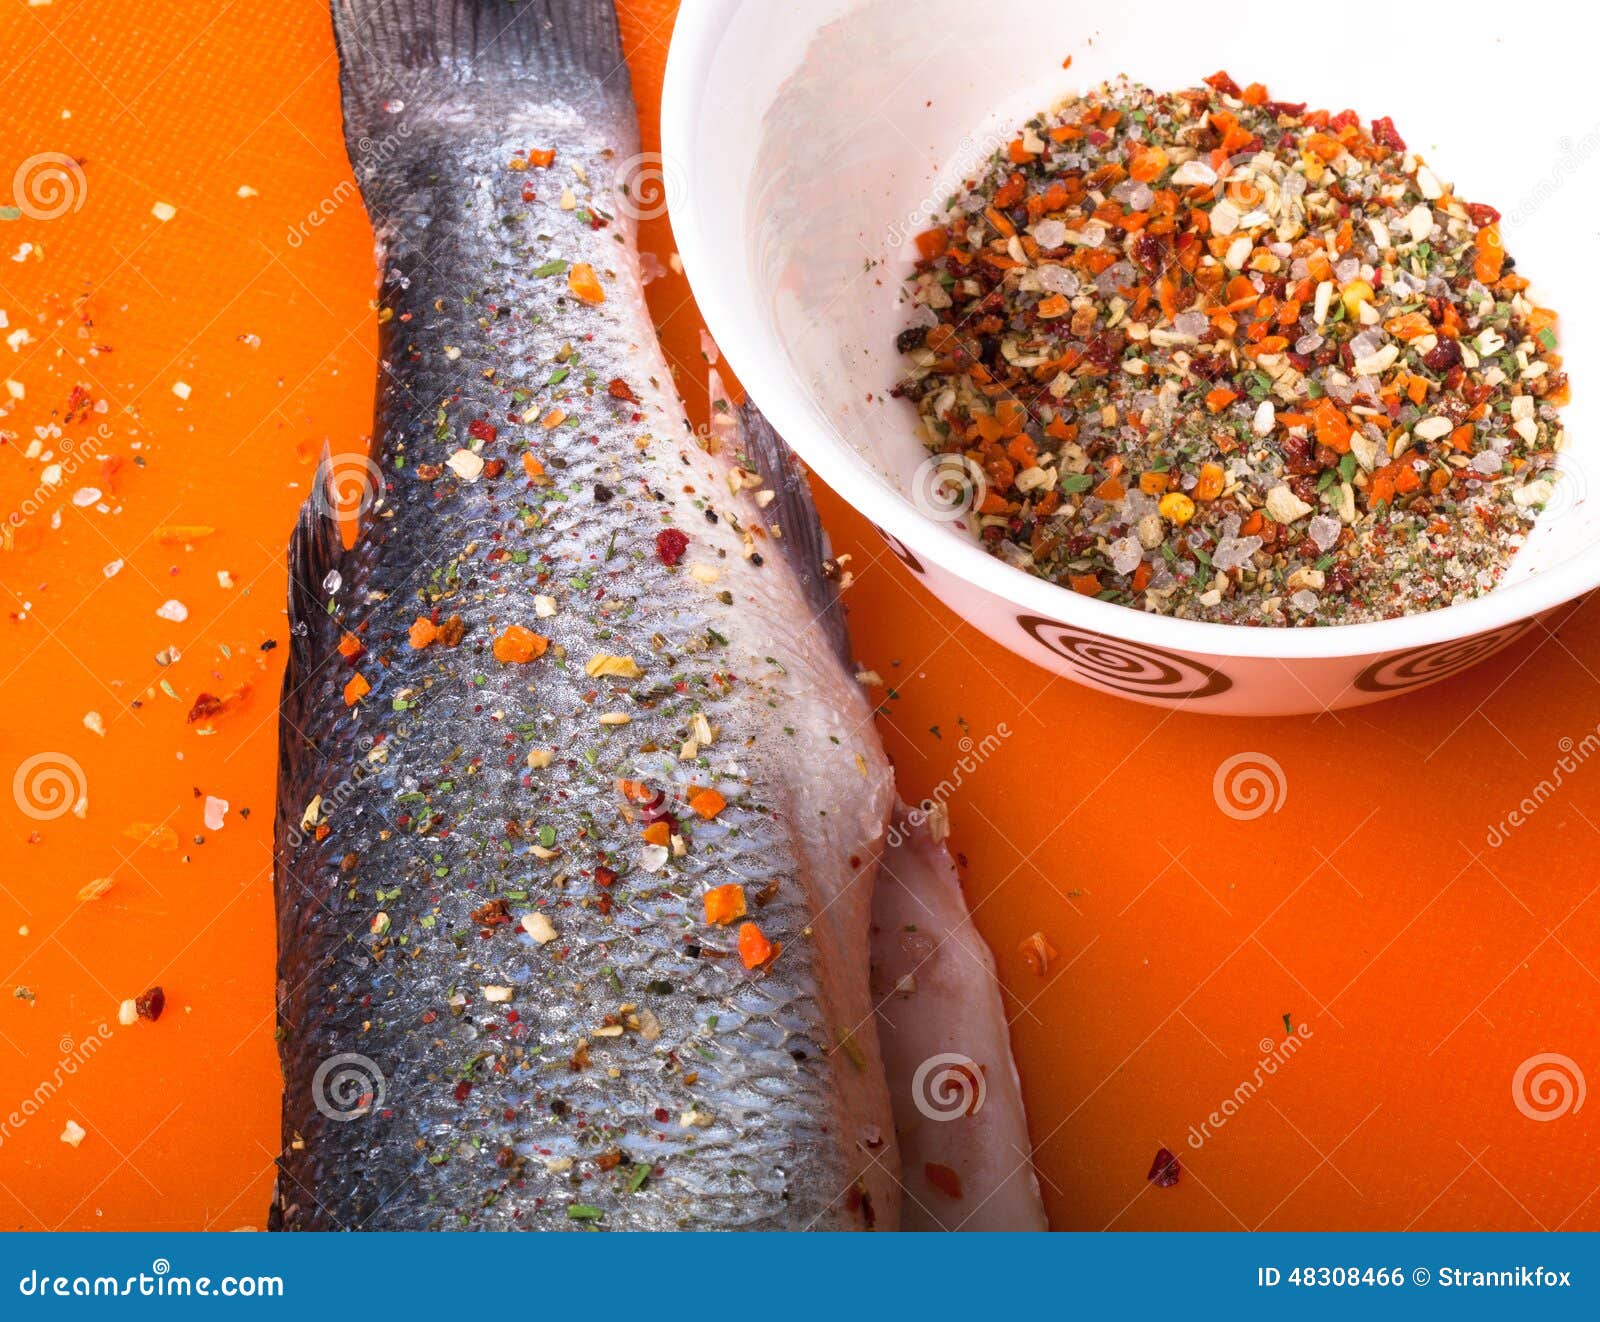 Fish and Spices on a Plastic Cutting Board. Fish in the Process